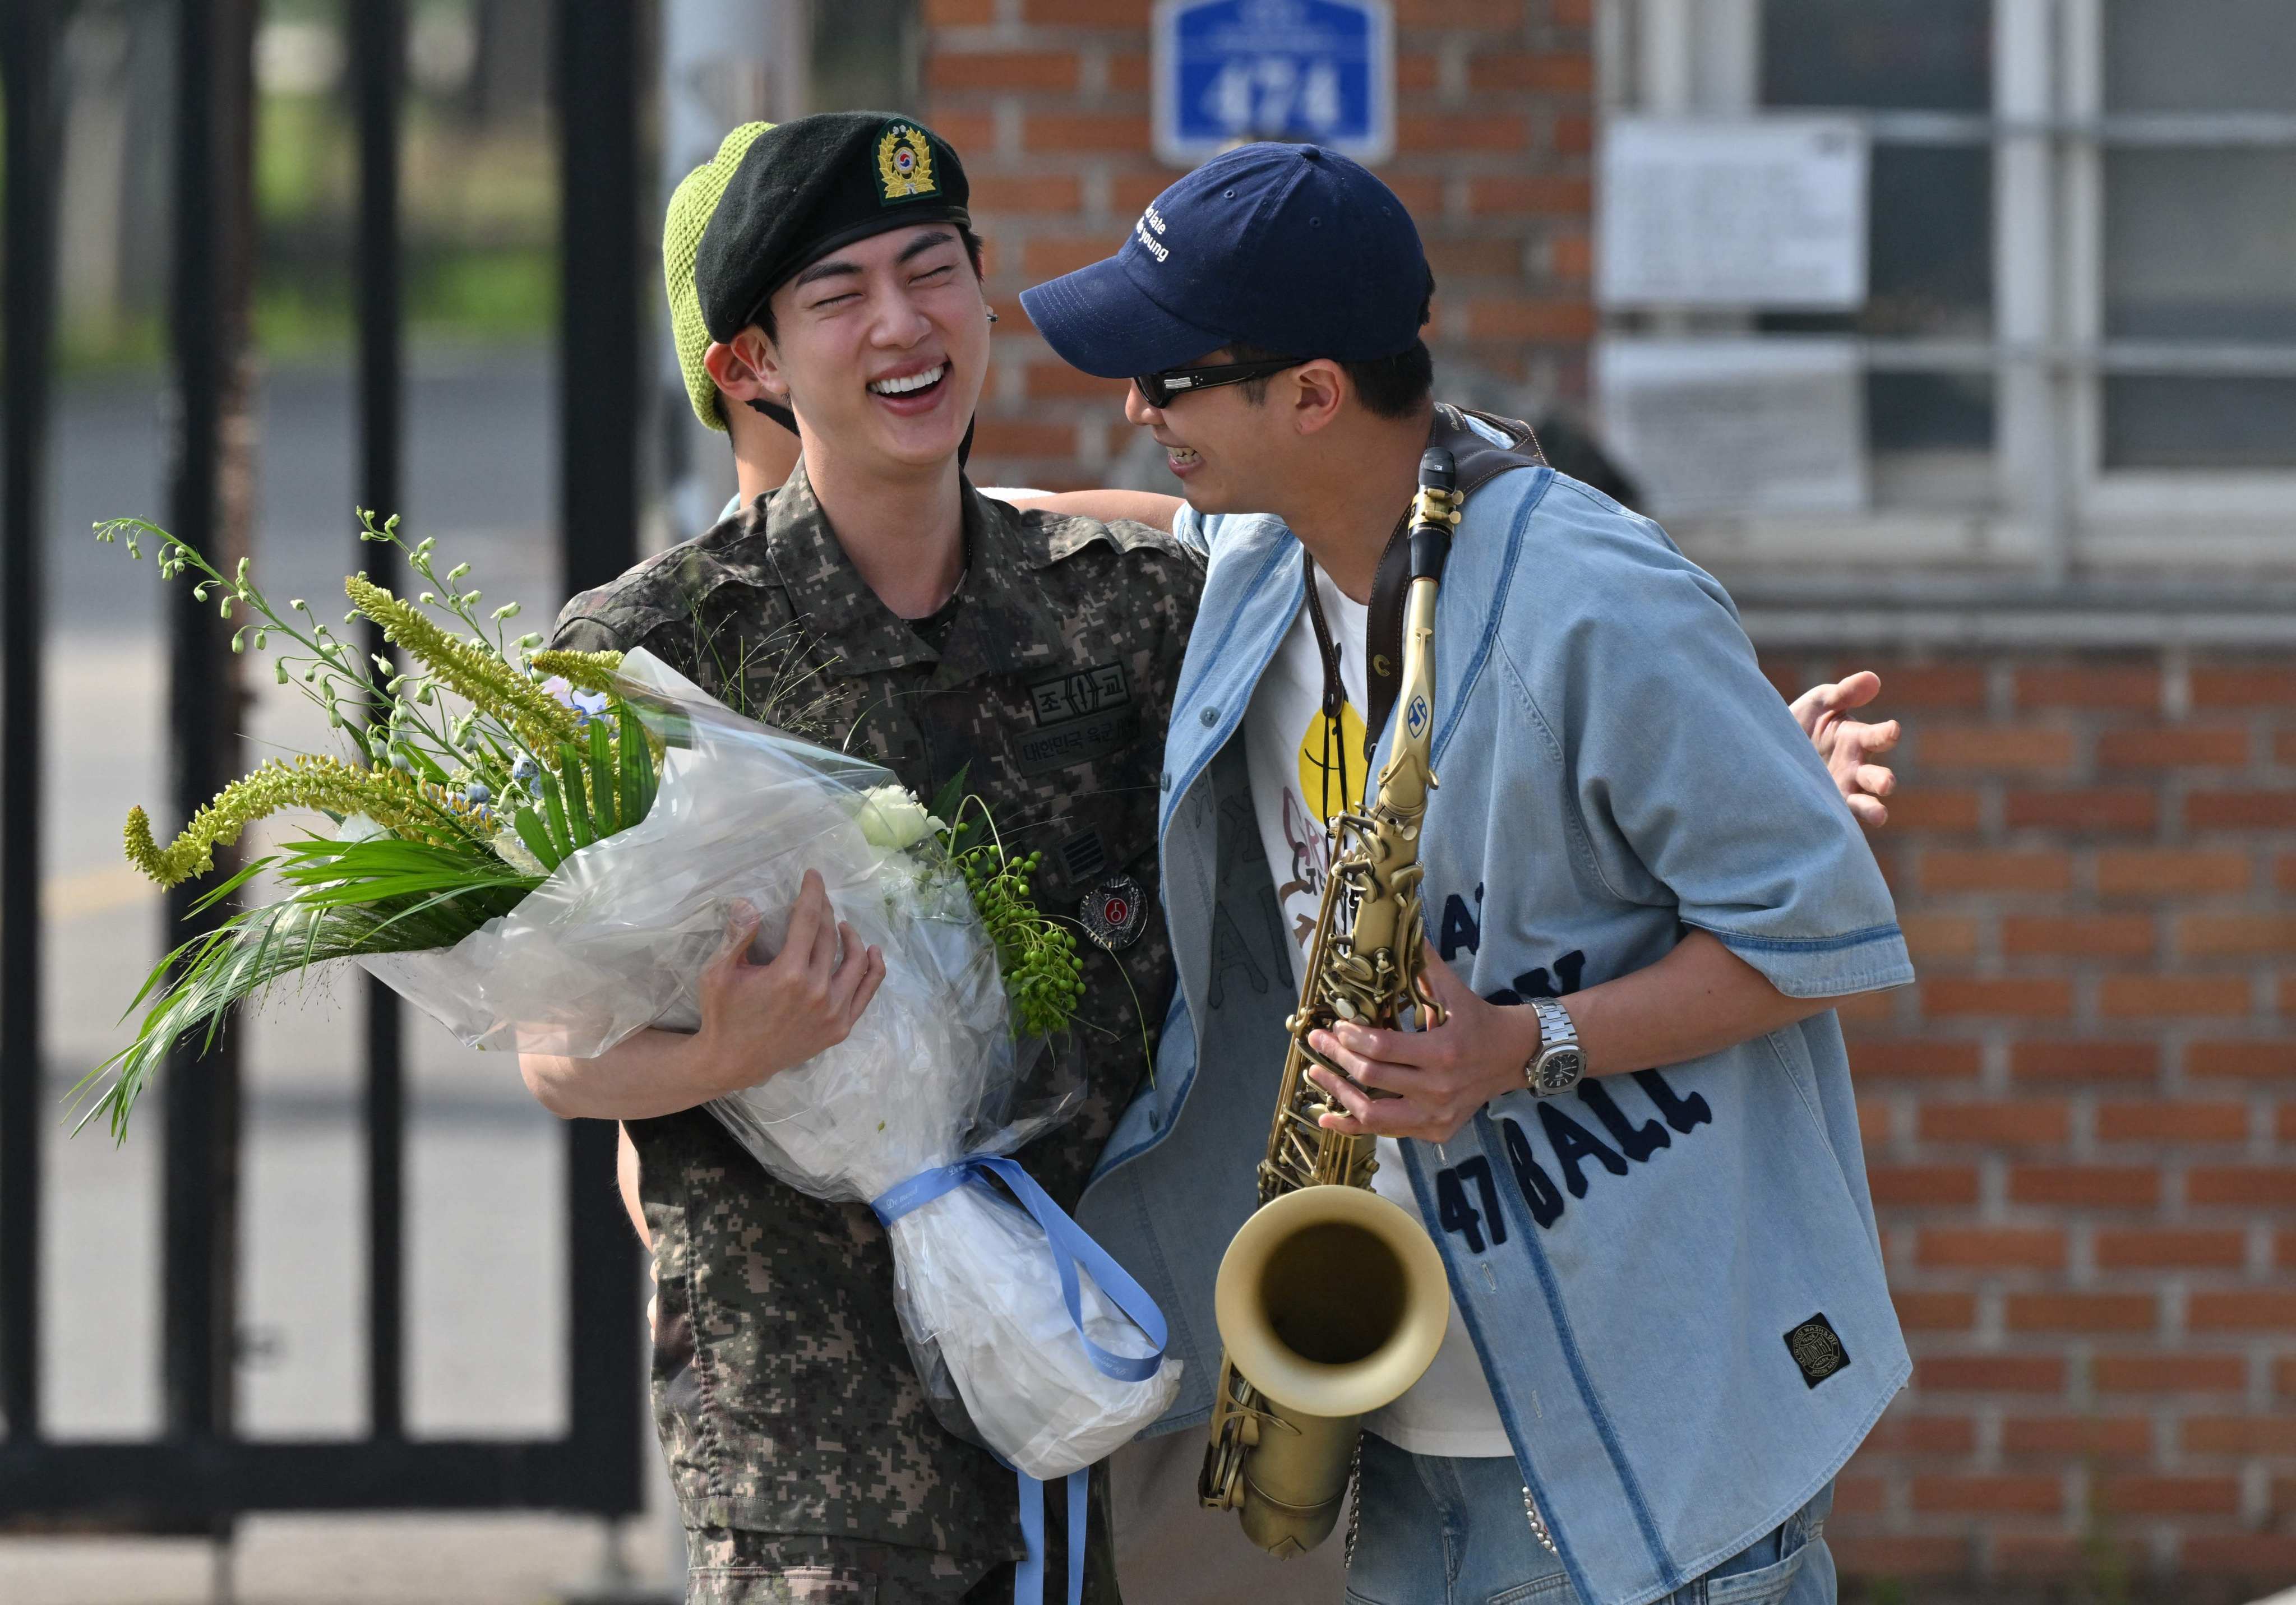 K-pop boy band BTS member Jin is greeted by fellow BTS member RM after being discharged from his mandatory military service outside a base in Yeoncheon on Wednesday. Photo: AFP